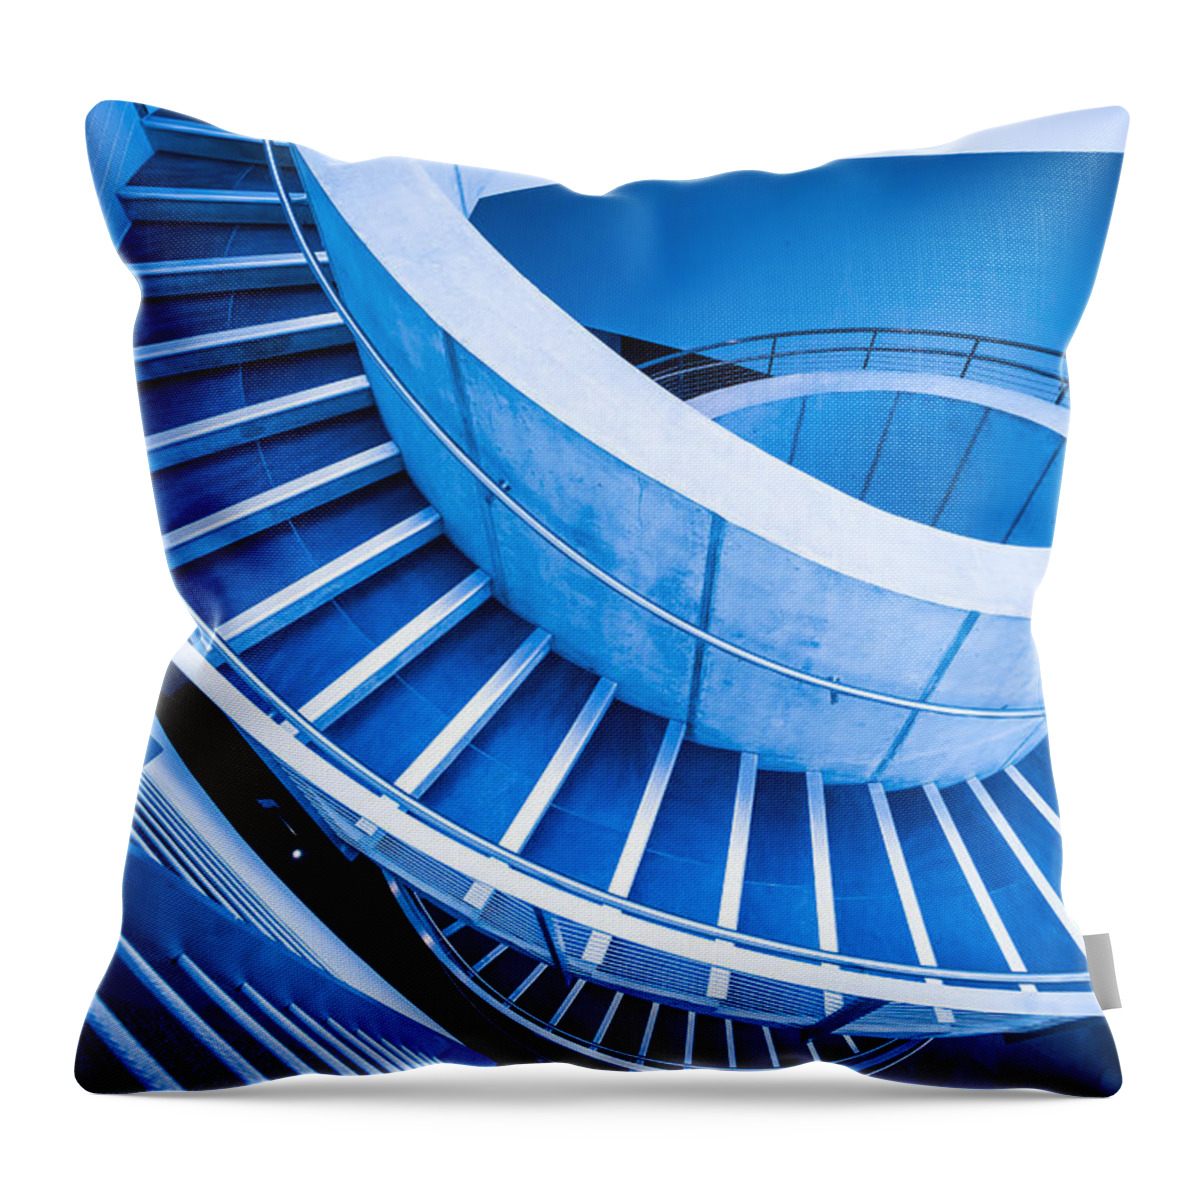 2012 Throw Pillow featuring the photograph Dali Museum St Petersburg Florida by Judith Barath